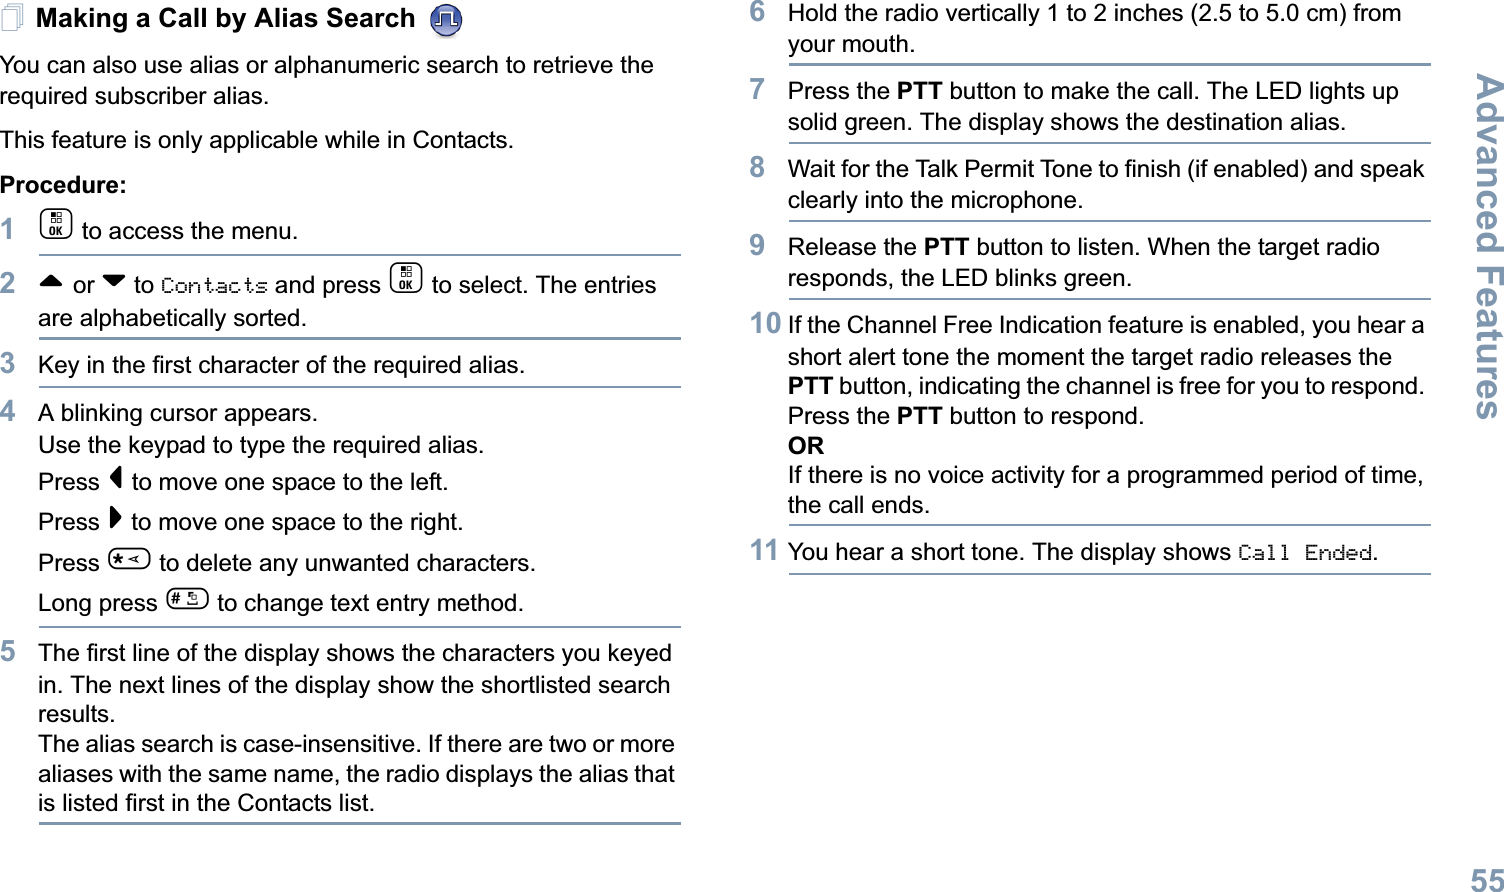 Advanced FeaturesEnglish55Making a Call by Alias Search You can also use alias or alphanumeric search to retrieve the required subscriber alias.This feature is only applicable while in Contacts.Procedure:1c to access the menu.2^ or v to Contacts and press c to select. The entries are alphabetically sorted.3Key in the first character of the required alias.4A blinking cursor appears.Use the keypad to type the required alias.Press &lt; to move one space to the left.Press &gt; to move one space to the right.Press * to delete any unwanted characters.Long press # to change text entry method.5The first line of the display shows the characters you keyed in. The next lines of the display show the shortlisted search results.The alias search is case-insensitive. If there are two or more aliases with the same name, the radio displays the alias that is listed first in the Contacts list.6Hold the radio vertically 1 to 2 inches (2.5 to 5.0 cm) from your mouth.7Press the PTT button to make the call. The LED lights up solid green. The display shows the destination alias.8Wait for the Talk Permit Tone to finish (if enabled) and speak clearly into the microphone.9Release the PTT button to listen. When the target radio responds, the LED blinks green.10 If the Channel Free Indication feature is enabled, you hear a short alert tone the moment the target radio releases the PTT button, indicating the channel is free for you to respond. Press the PTT button to respond.ORIf there is no voice activity for a programmed period of time, the call ends.11 You hear a short tone. The display shows Call Ended.